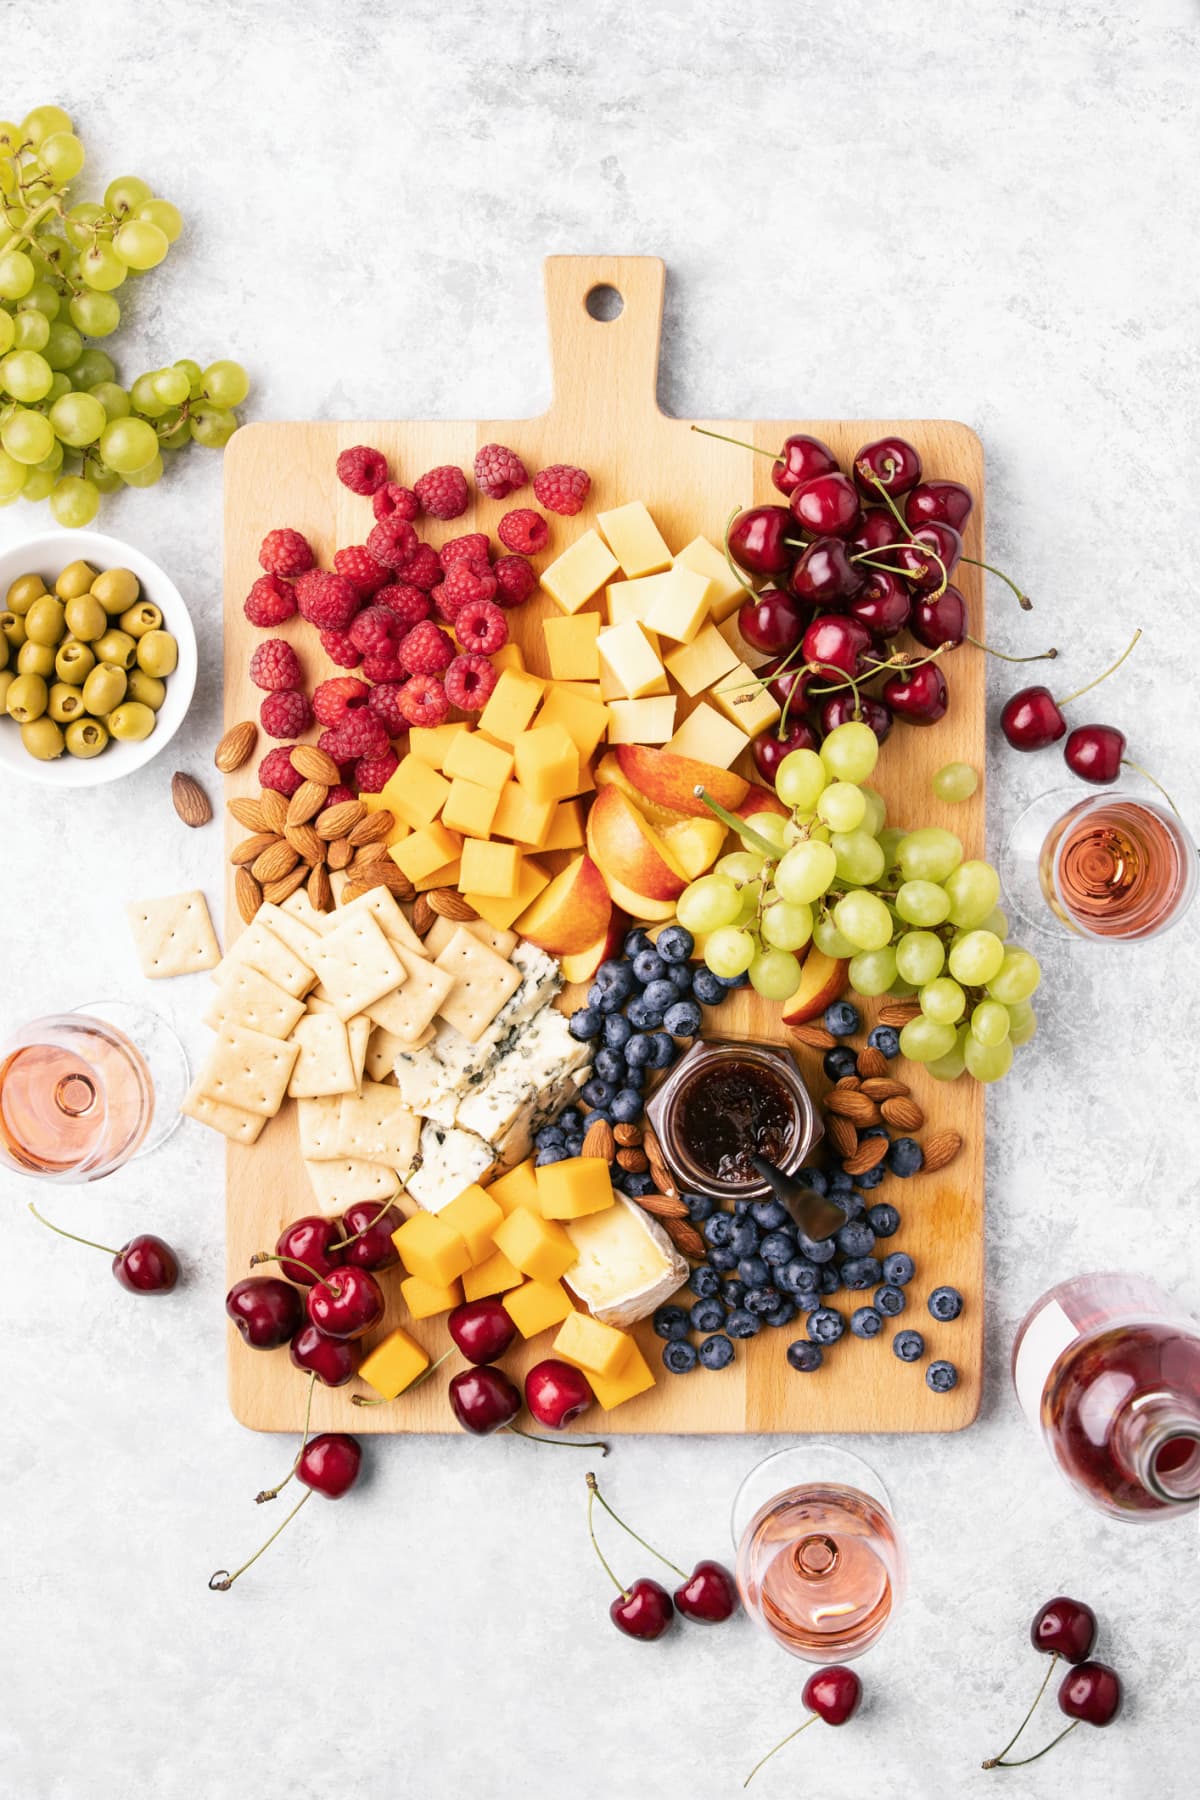 Summer cheese board with fresh ripe fruits and berries served with rose wine, view from above